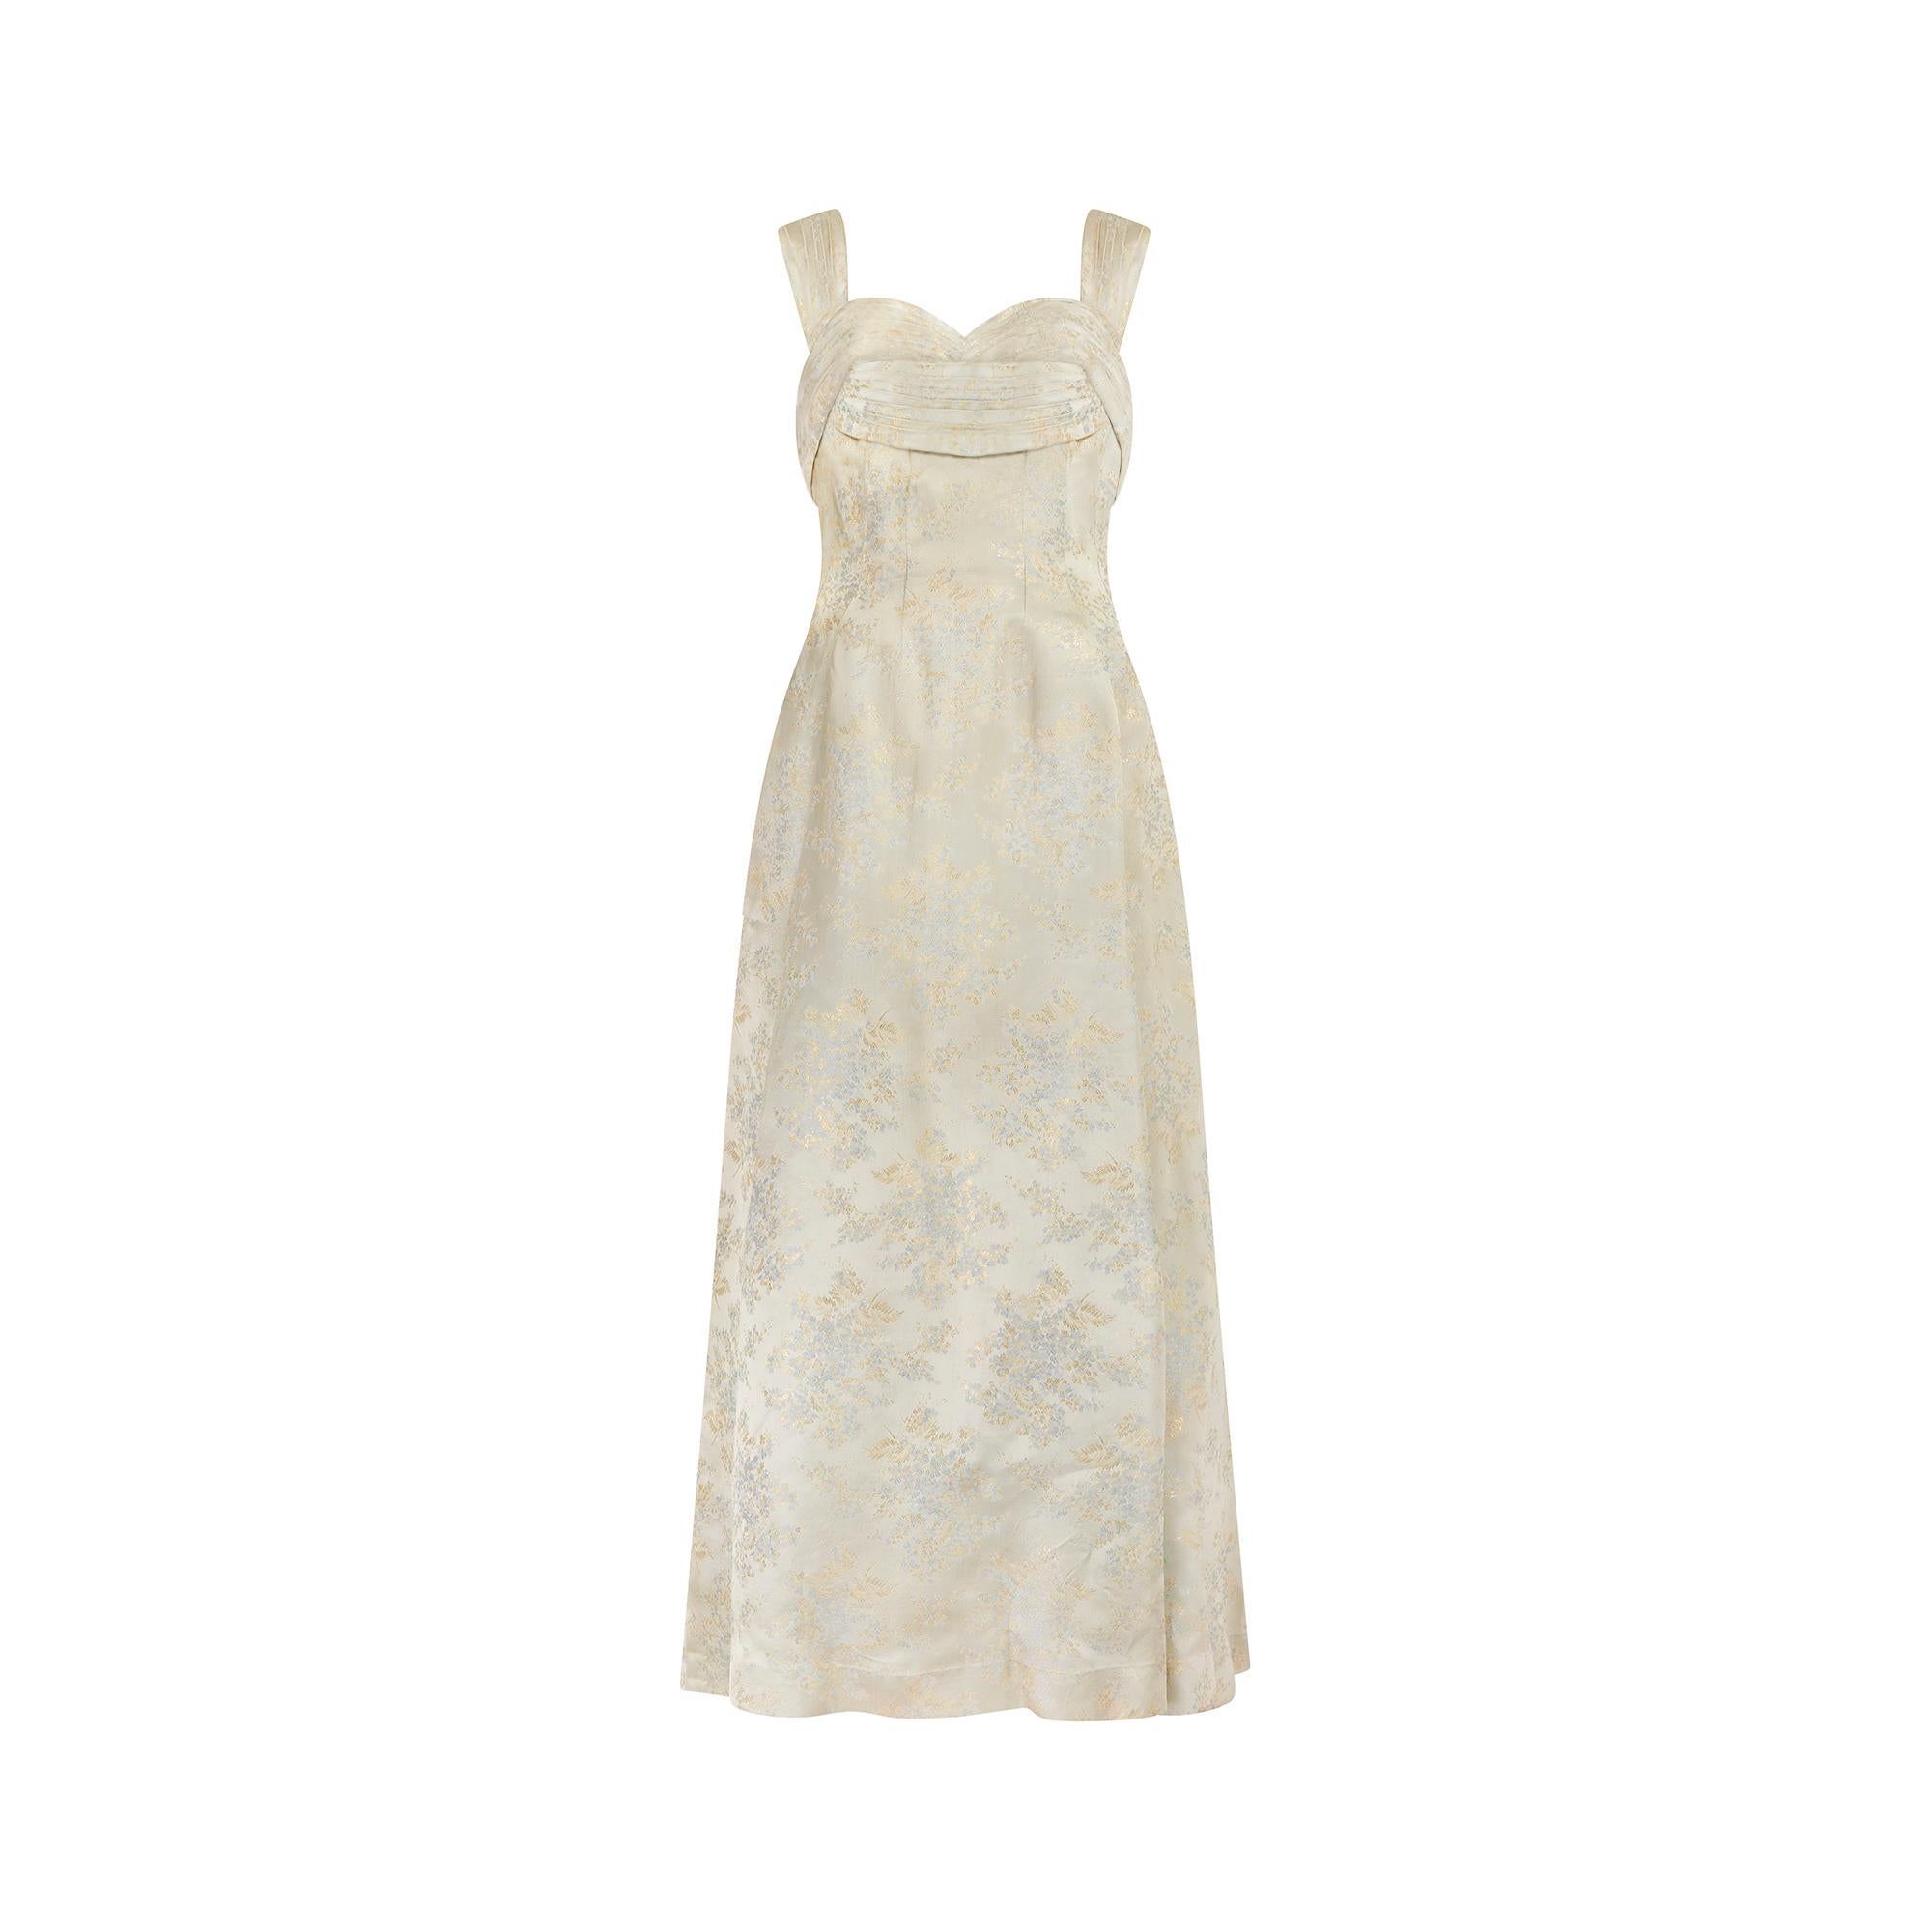 This British couture made jacquard ball gown dates to the mid 1950s and has been finished with hand-sewn details. The shimmering champagne hued brocade is detailed with gold ferns and blue-grey flowers. The wide straps and bust are intricately